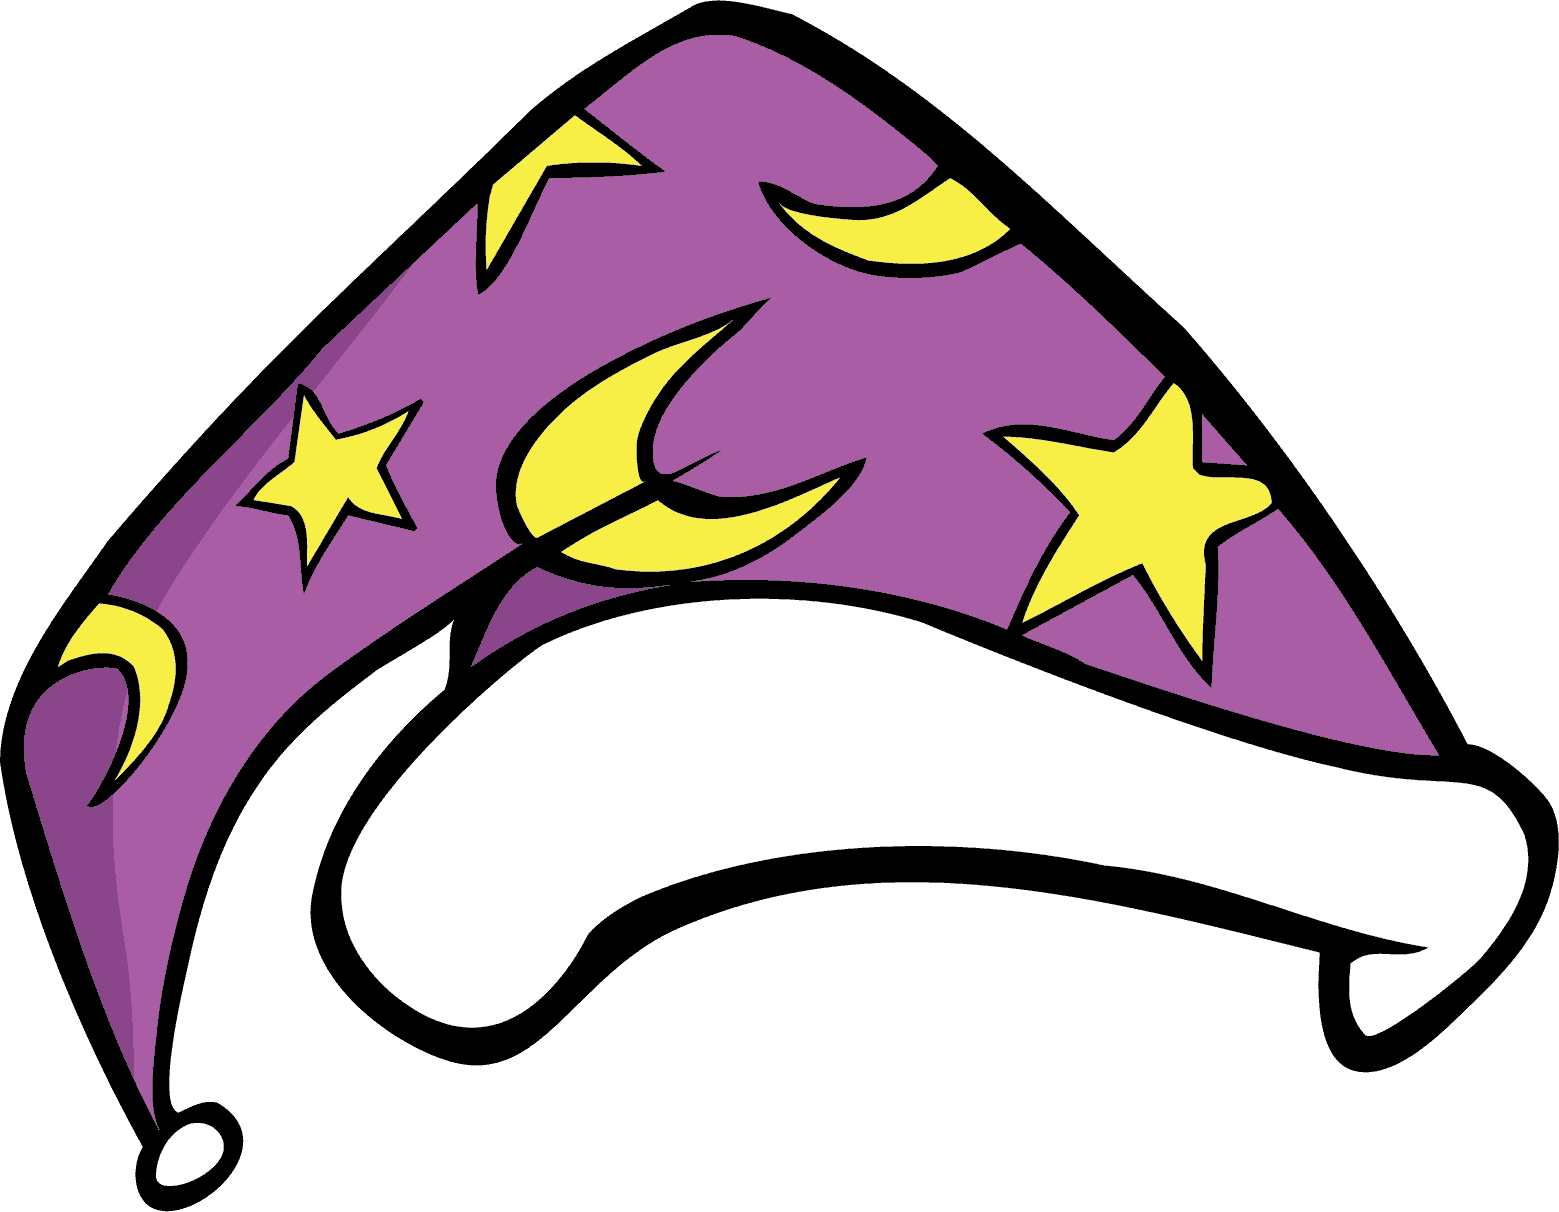 Free on dumielauxepices net. Clipart hat pajama